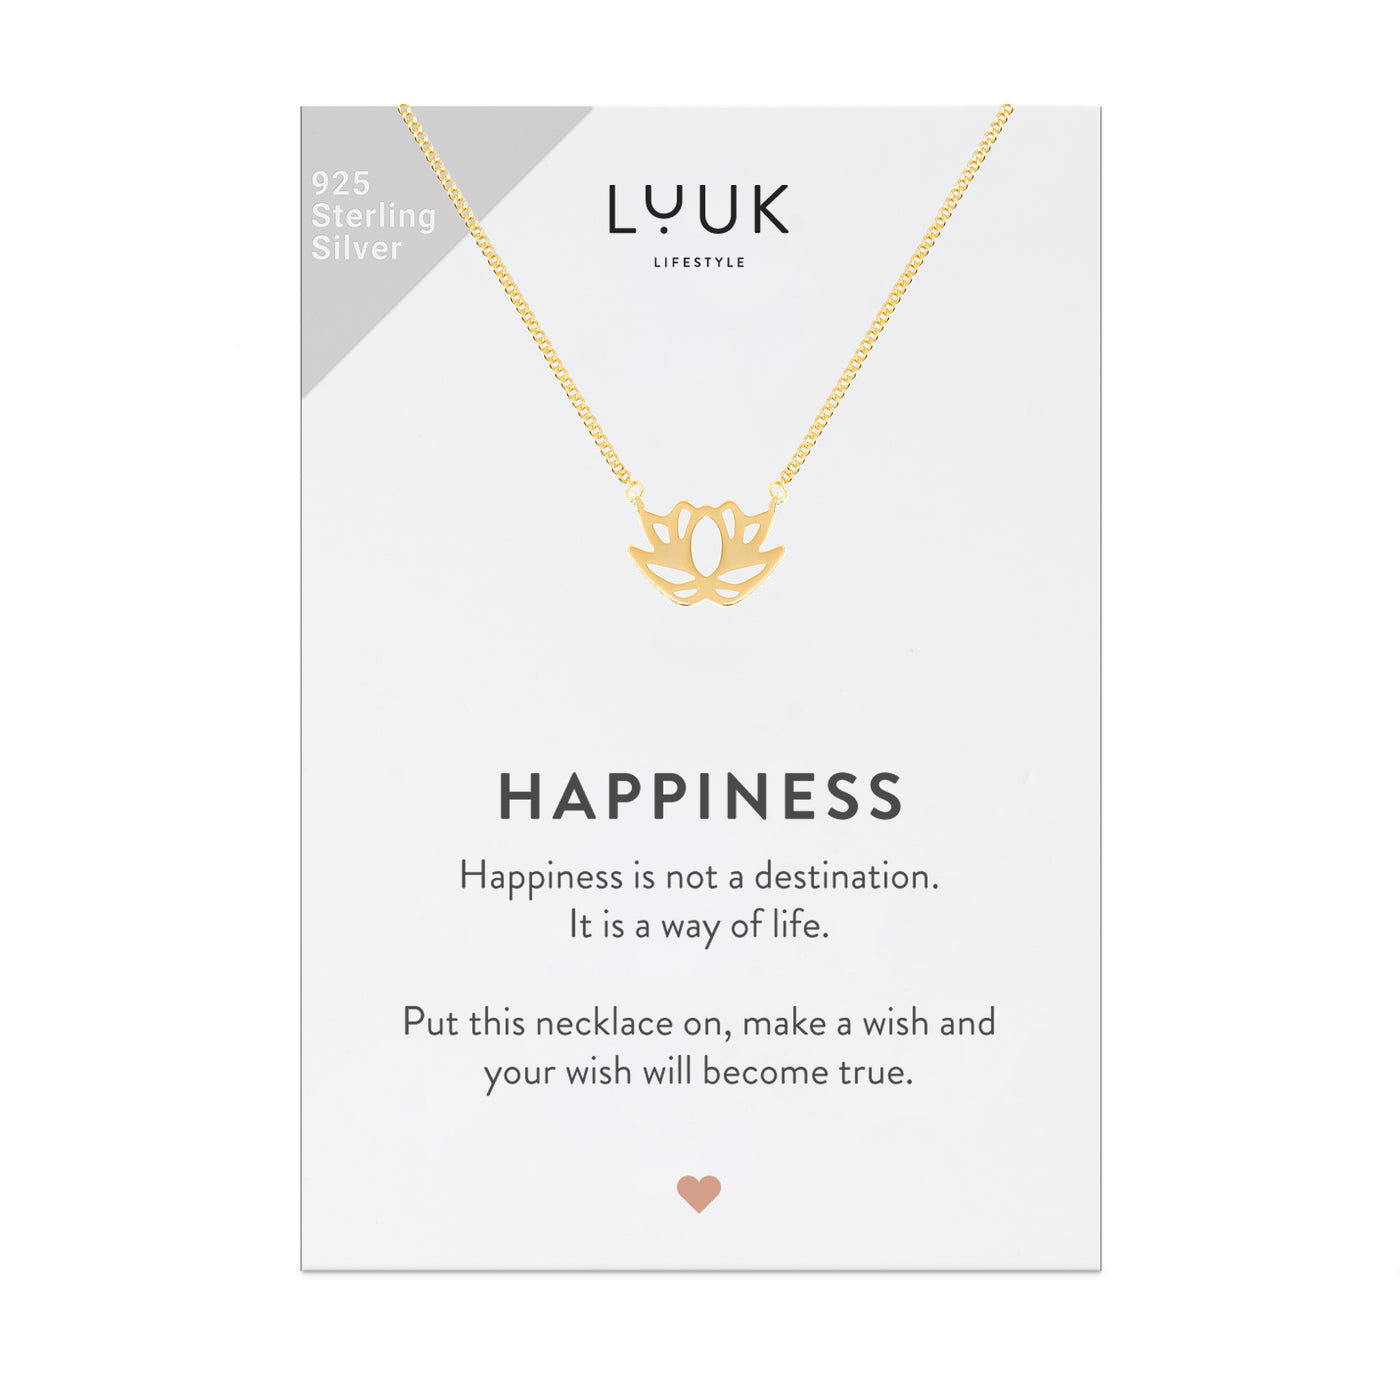 Sterling silver necklace with lotus flower pendant and Happiness greeting card